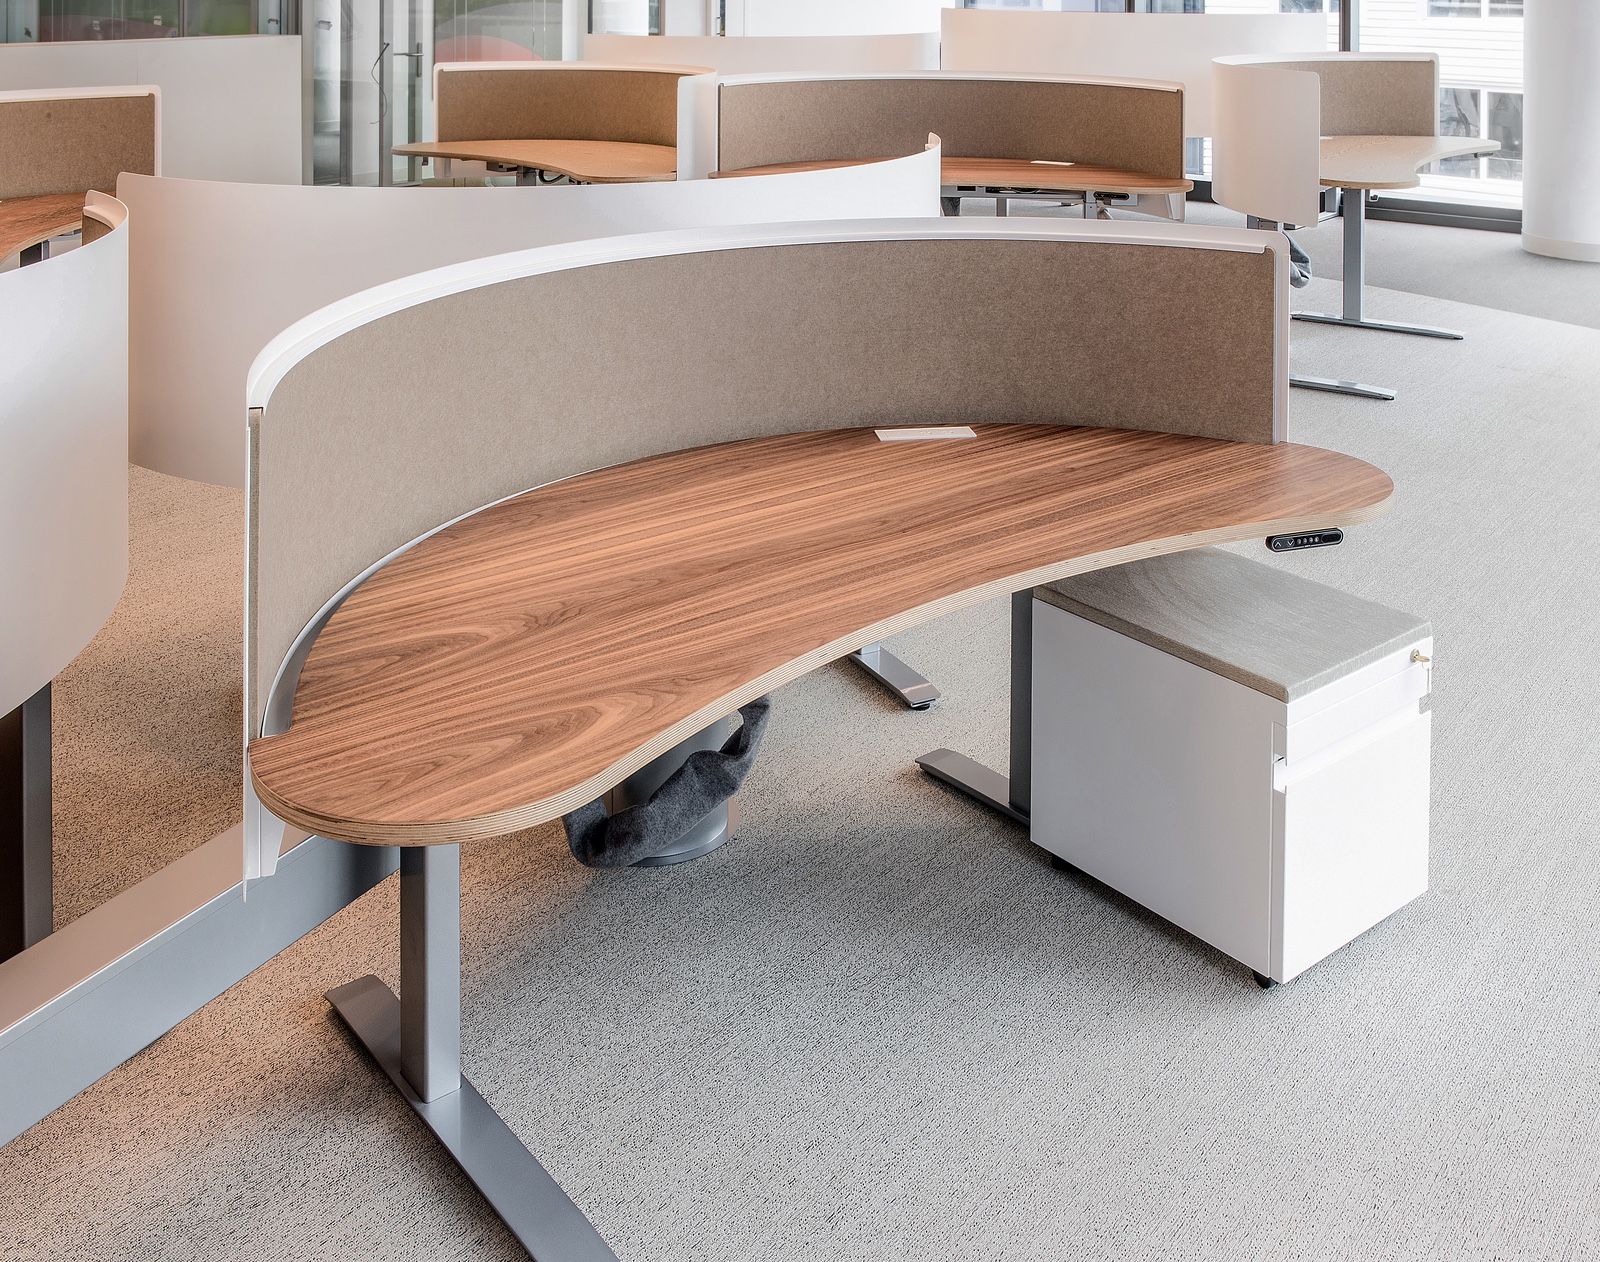 Cool Curves: The Harbor Stone Desk System